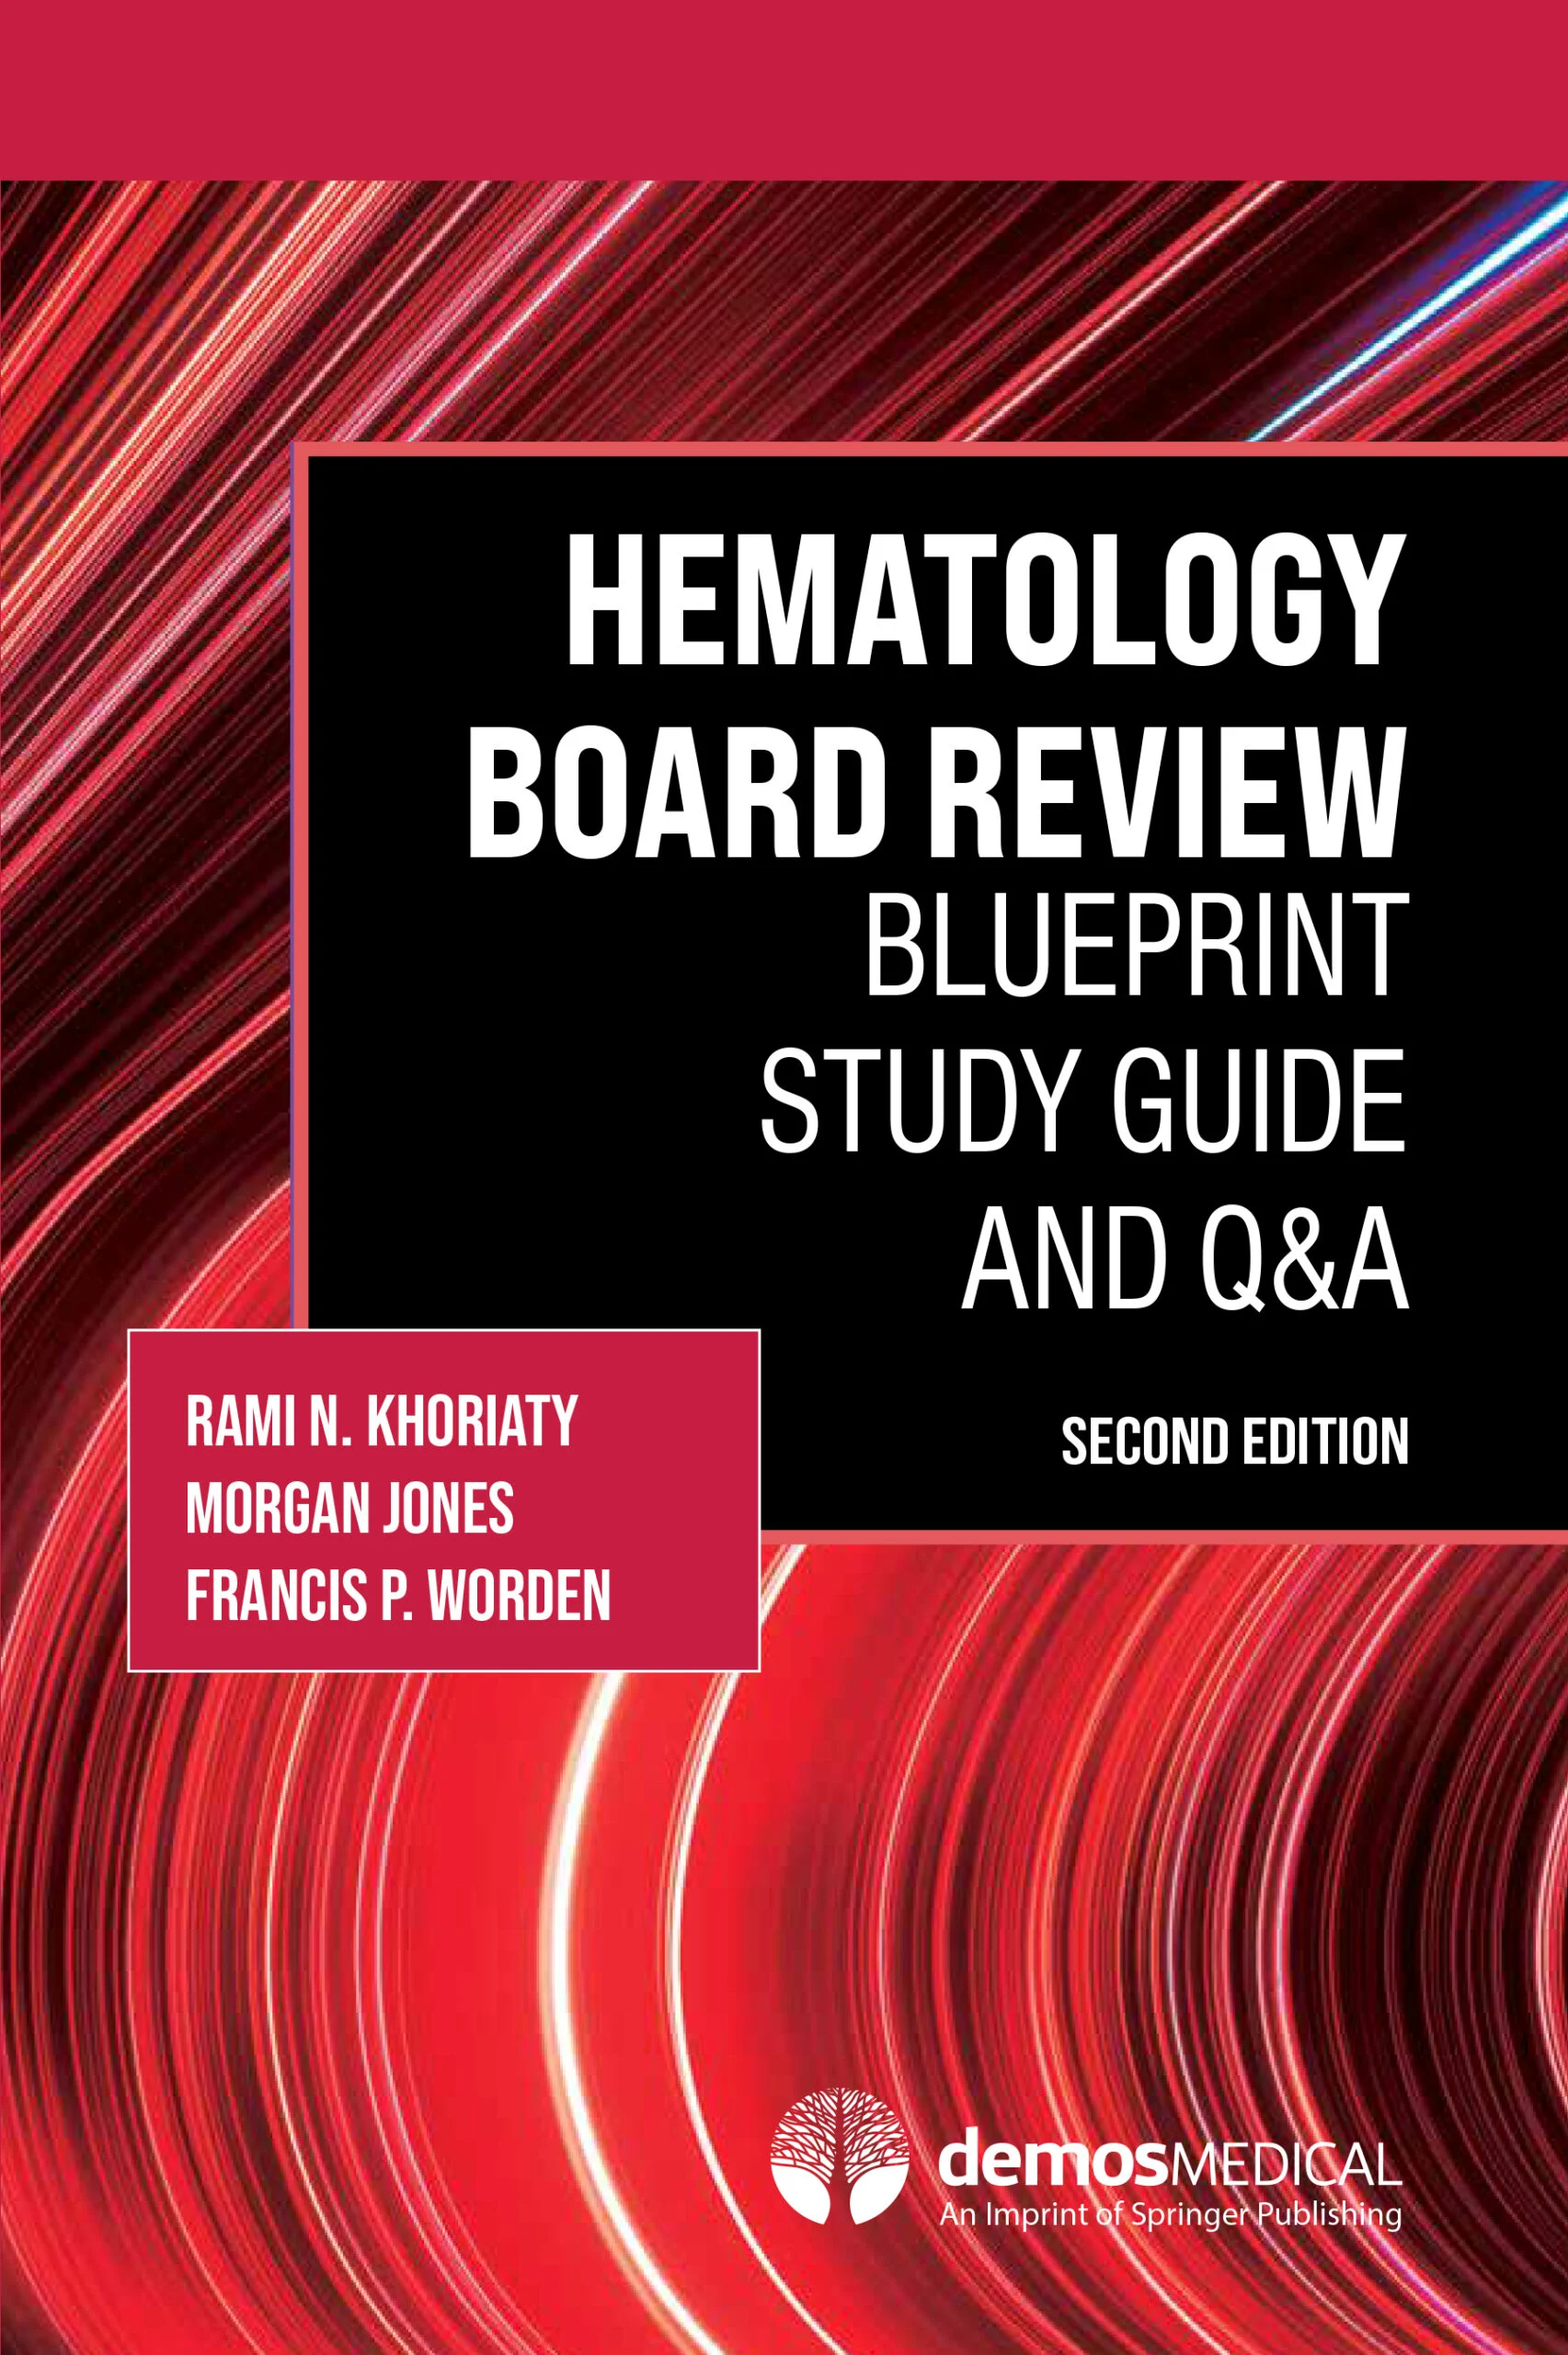 Hematology Board Review: Blueprint Study Guide And Q&A, 2nd Edition (Original PDF From Publisher)